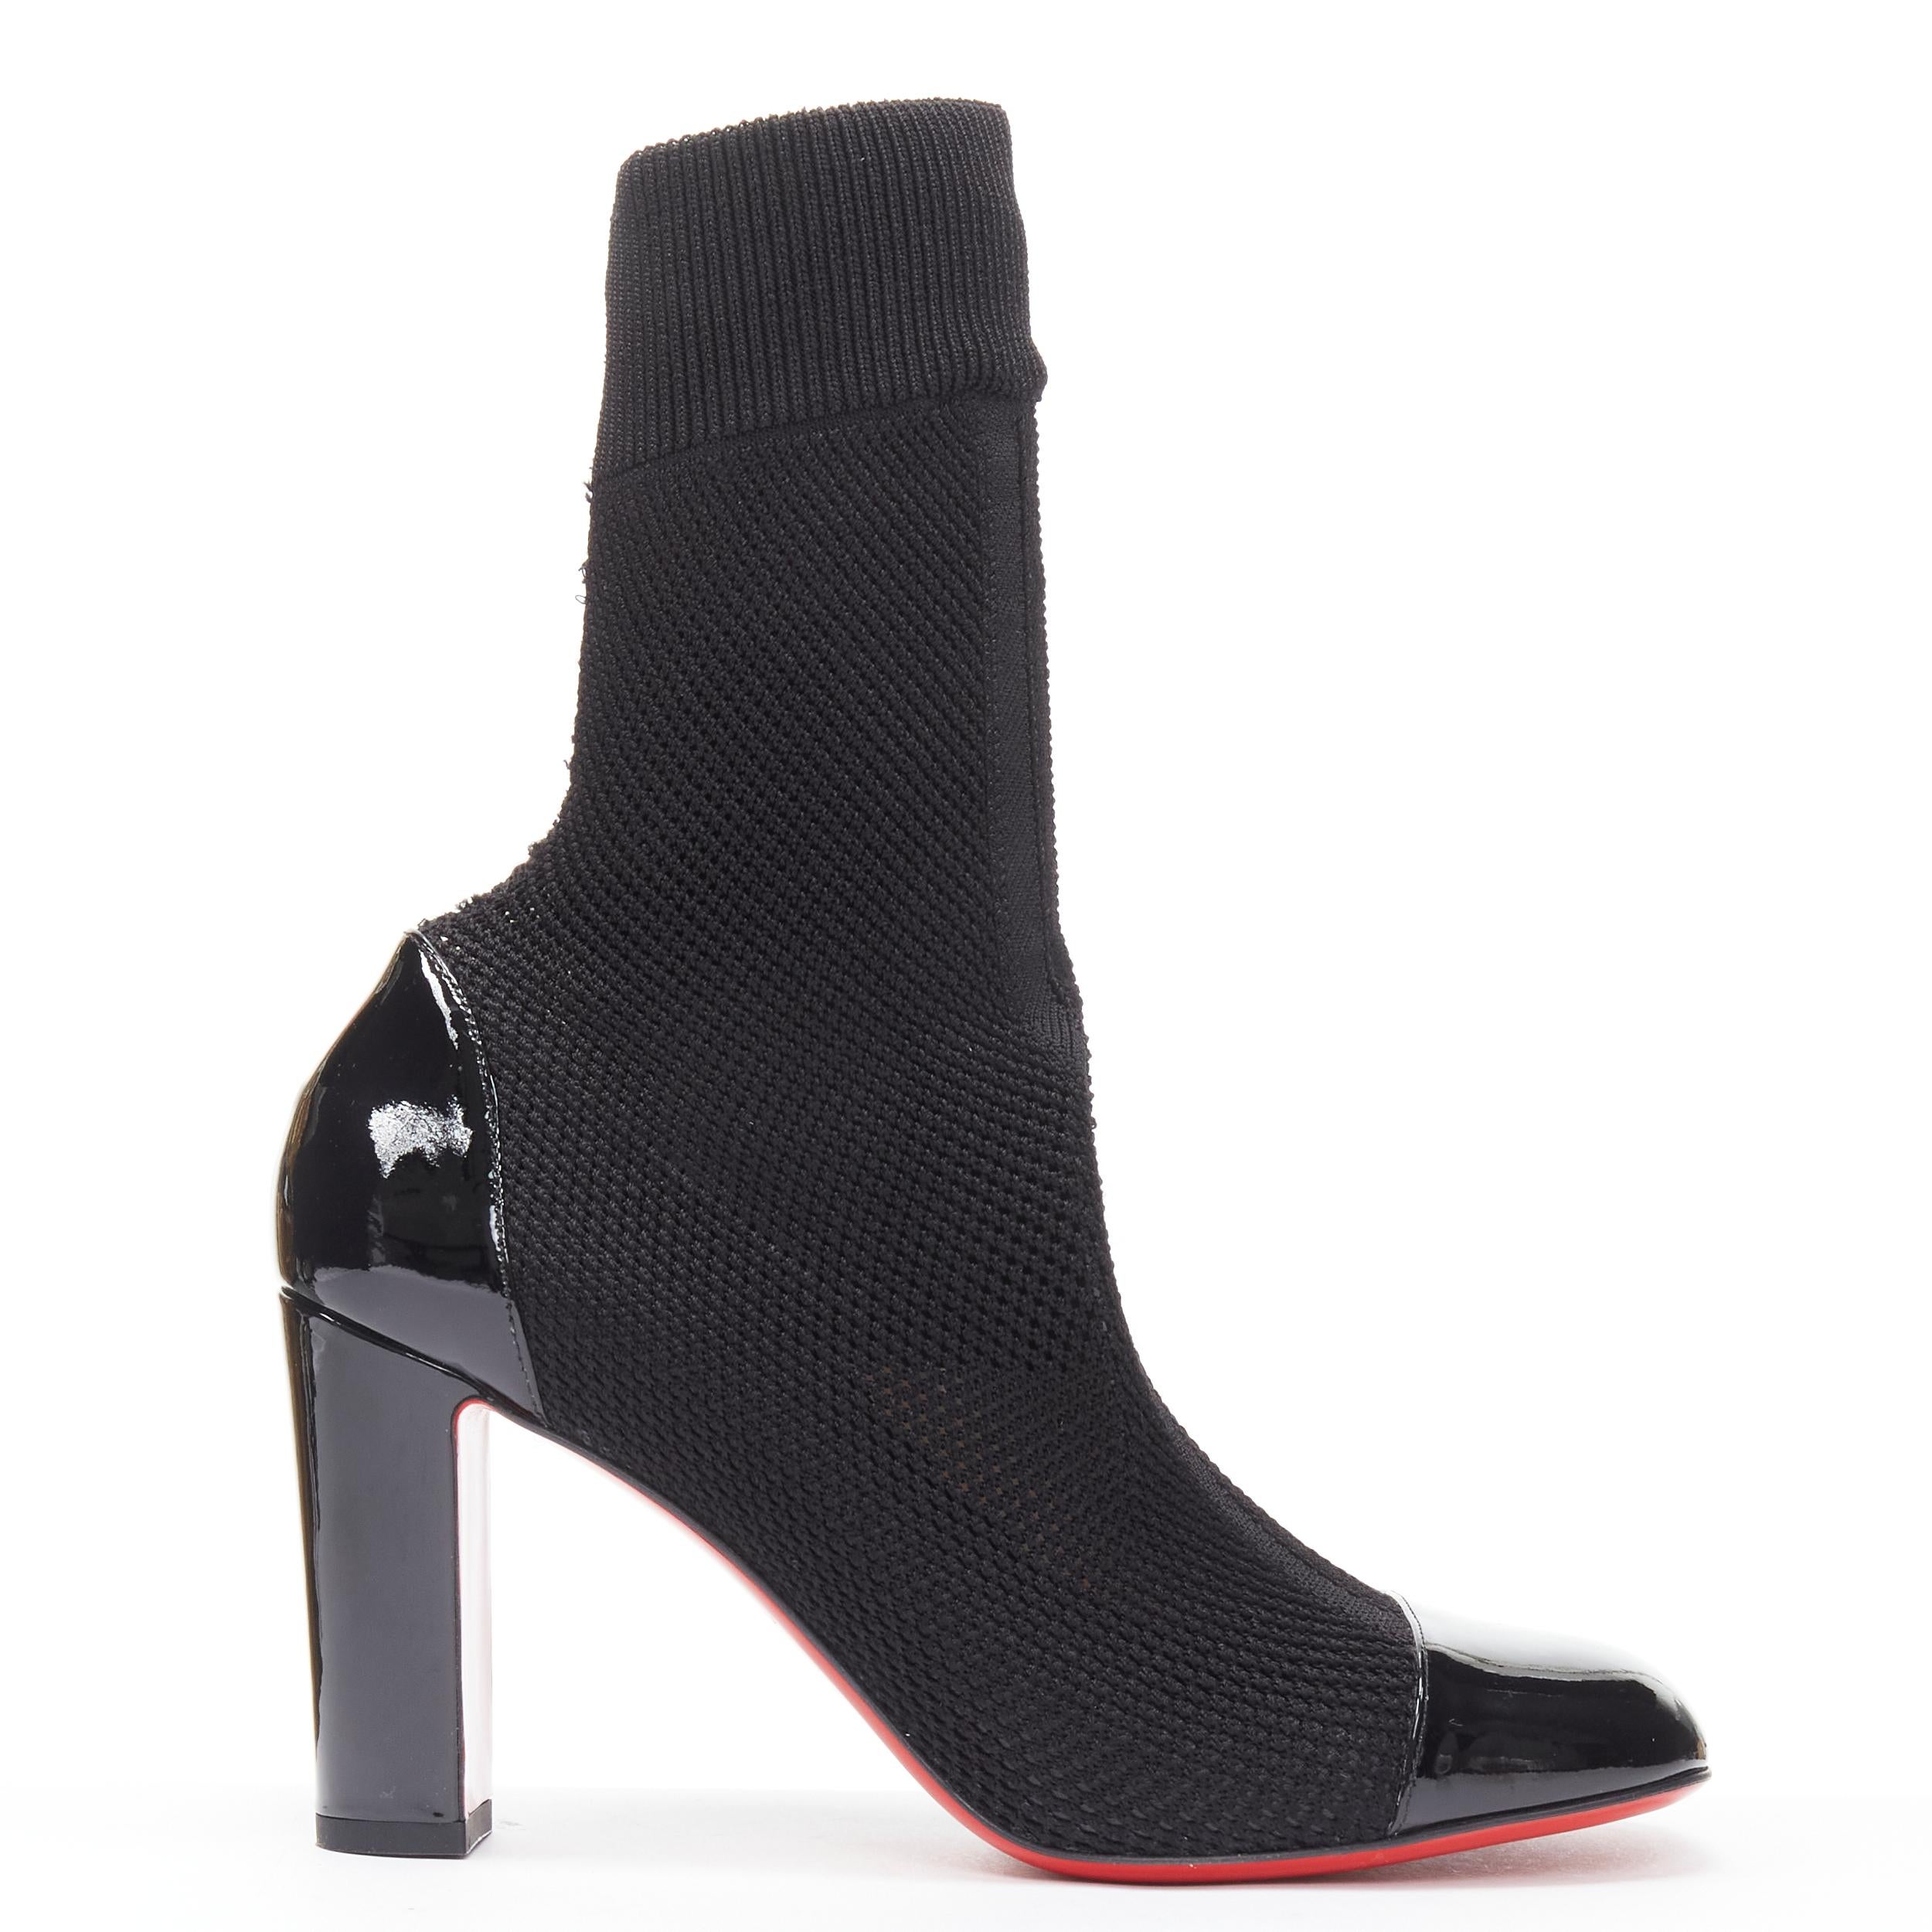 new CHRISTIAN LOUBOUTIN Taco Sock 85 black patent sock knit ankle boot EU38.5 
Reference: TGAS/B02094 
Brand: Christian Louboutin 
Material: Patent Leather 
Color: Black 
Pattern: Solid 
Closure: Stretch 
Made in: Italy 

CONDITION: 
Condition: New